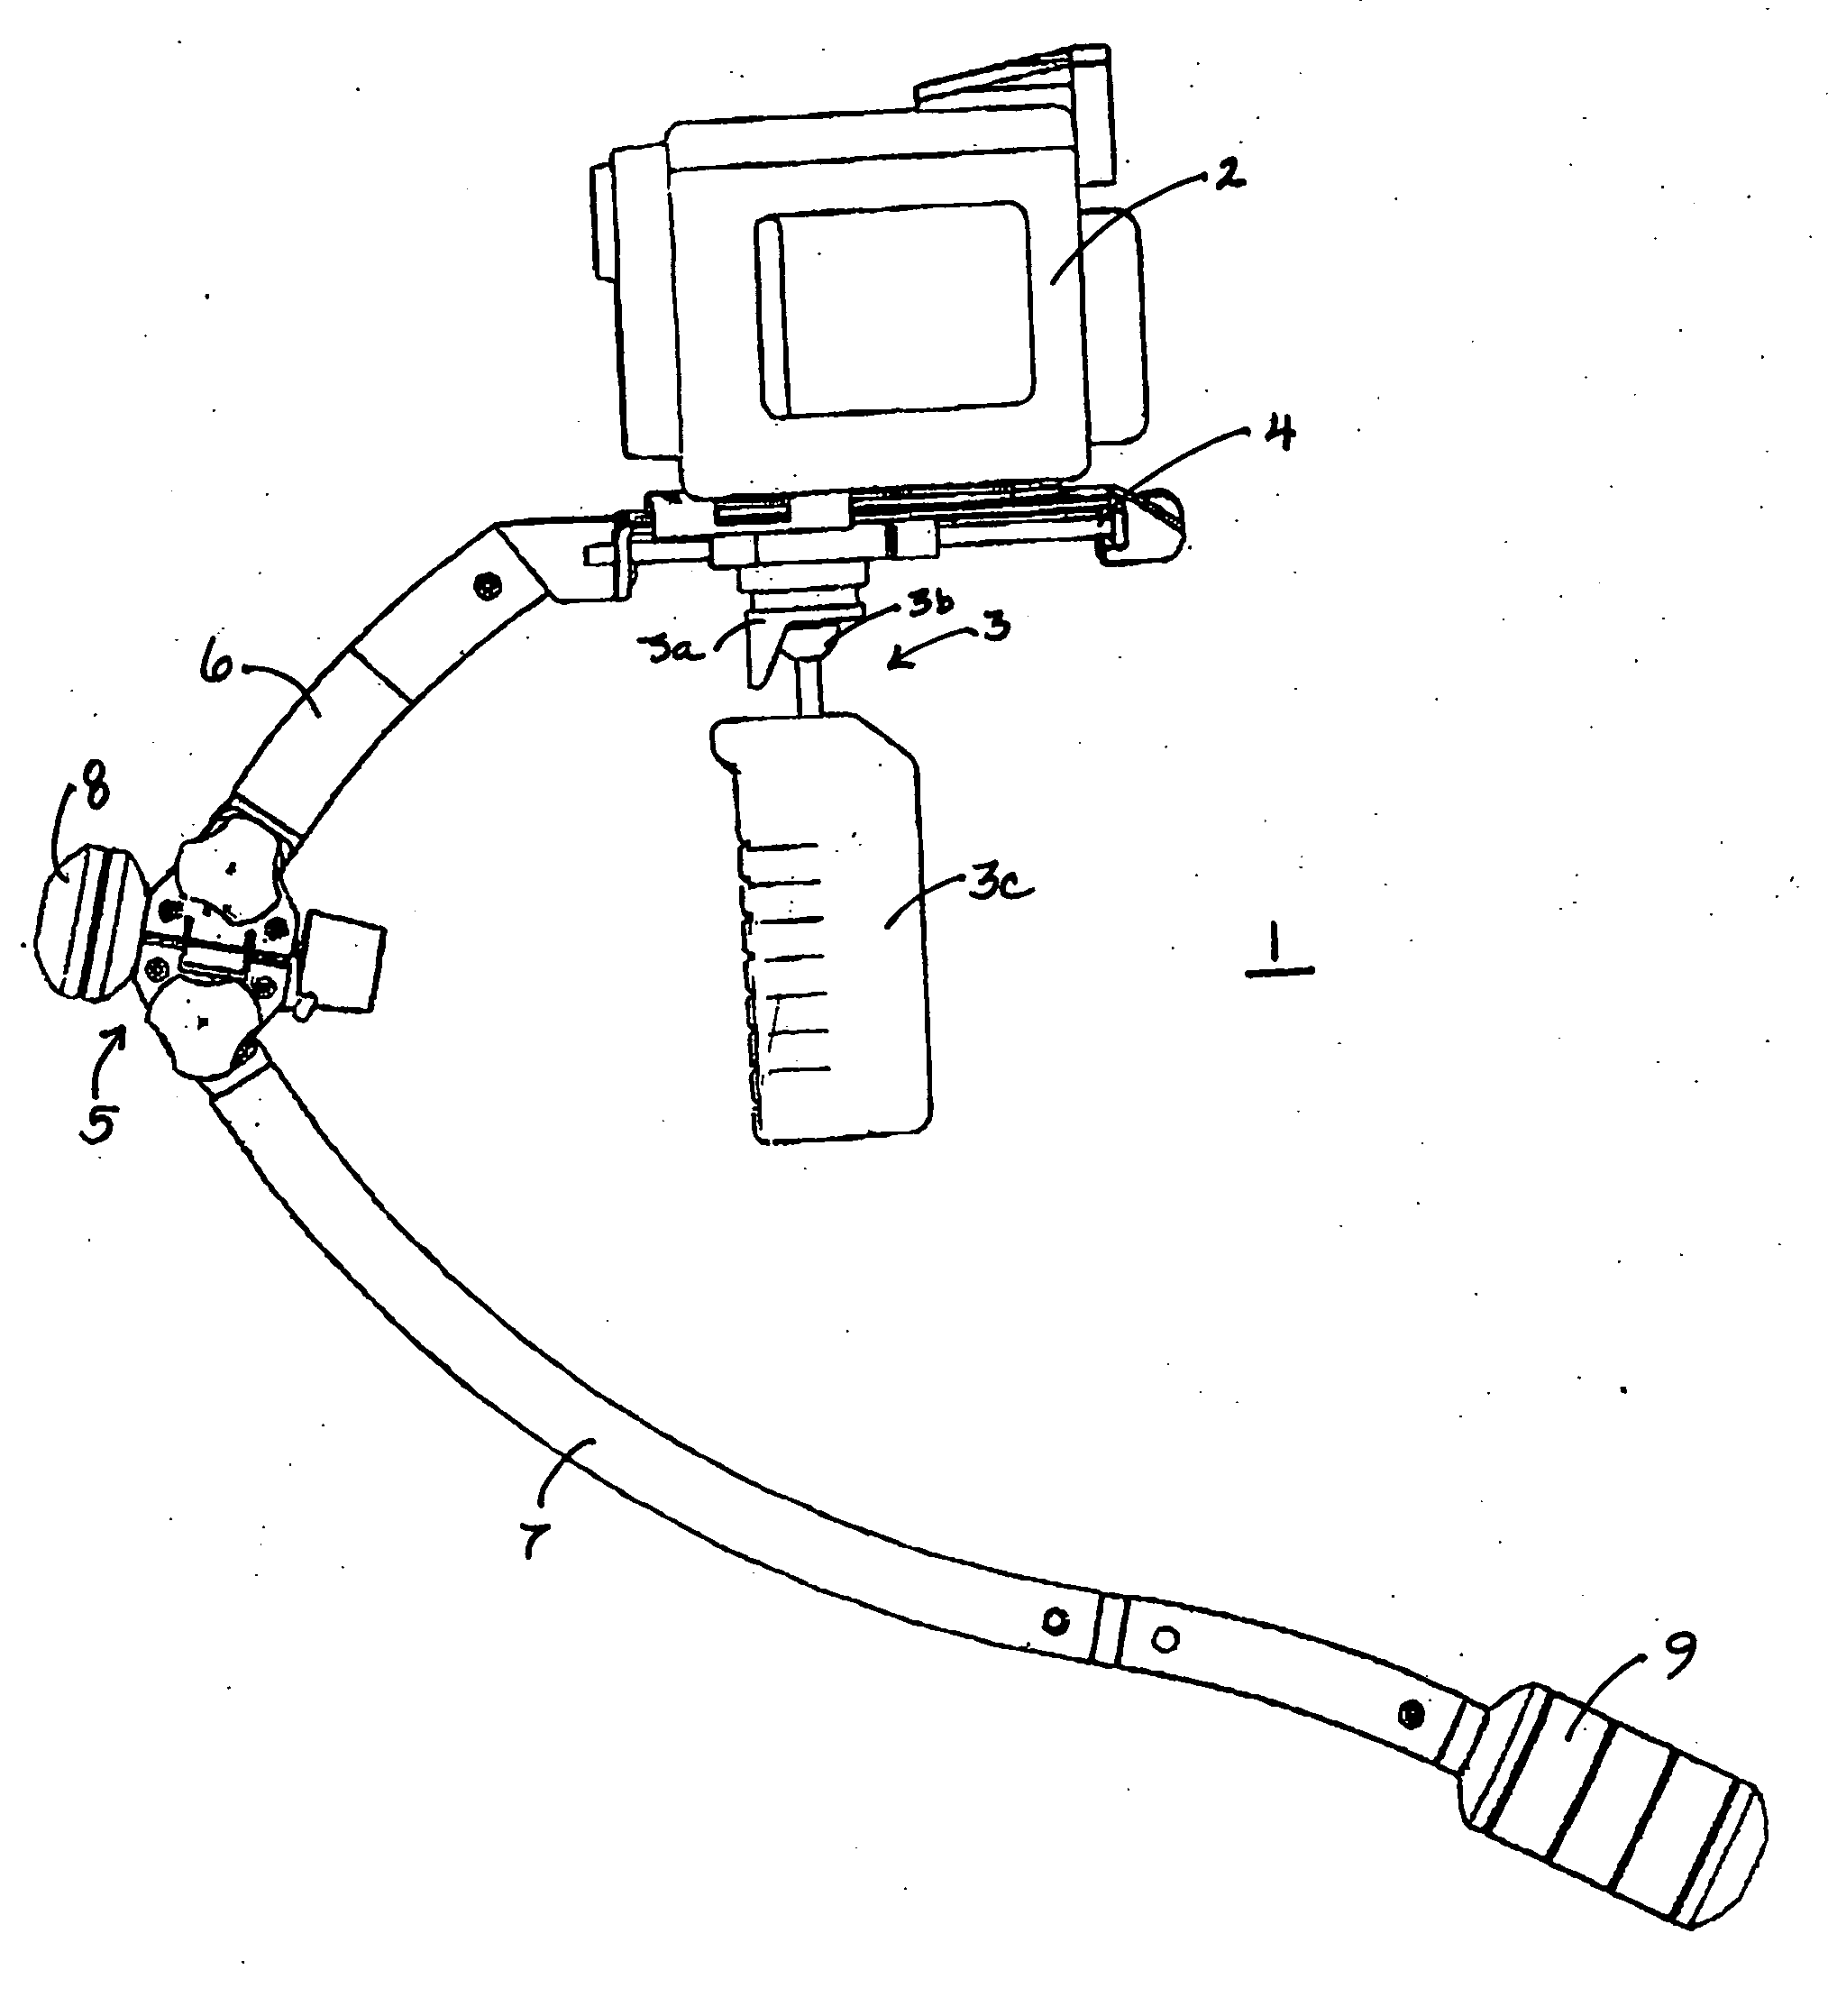 Folding and adjusting hinge for stabilized equipment support